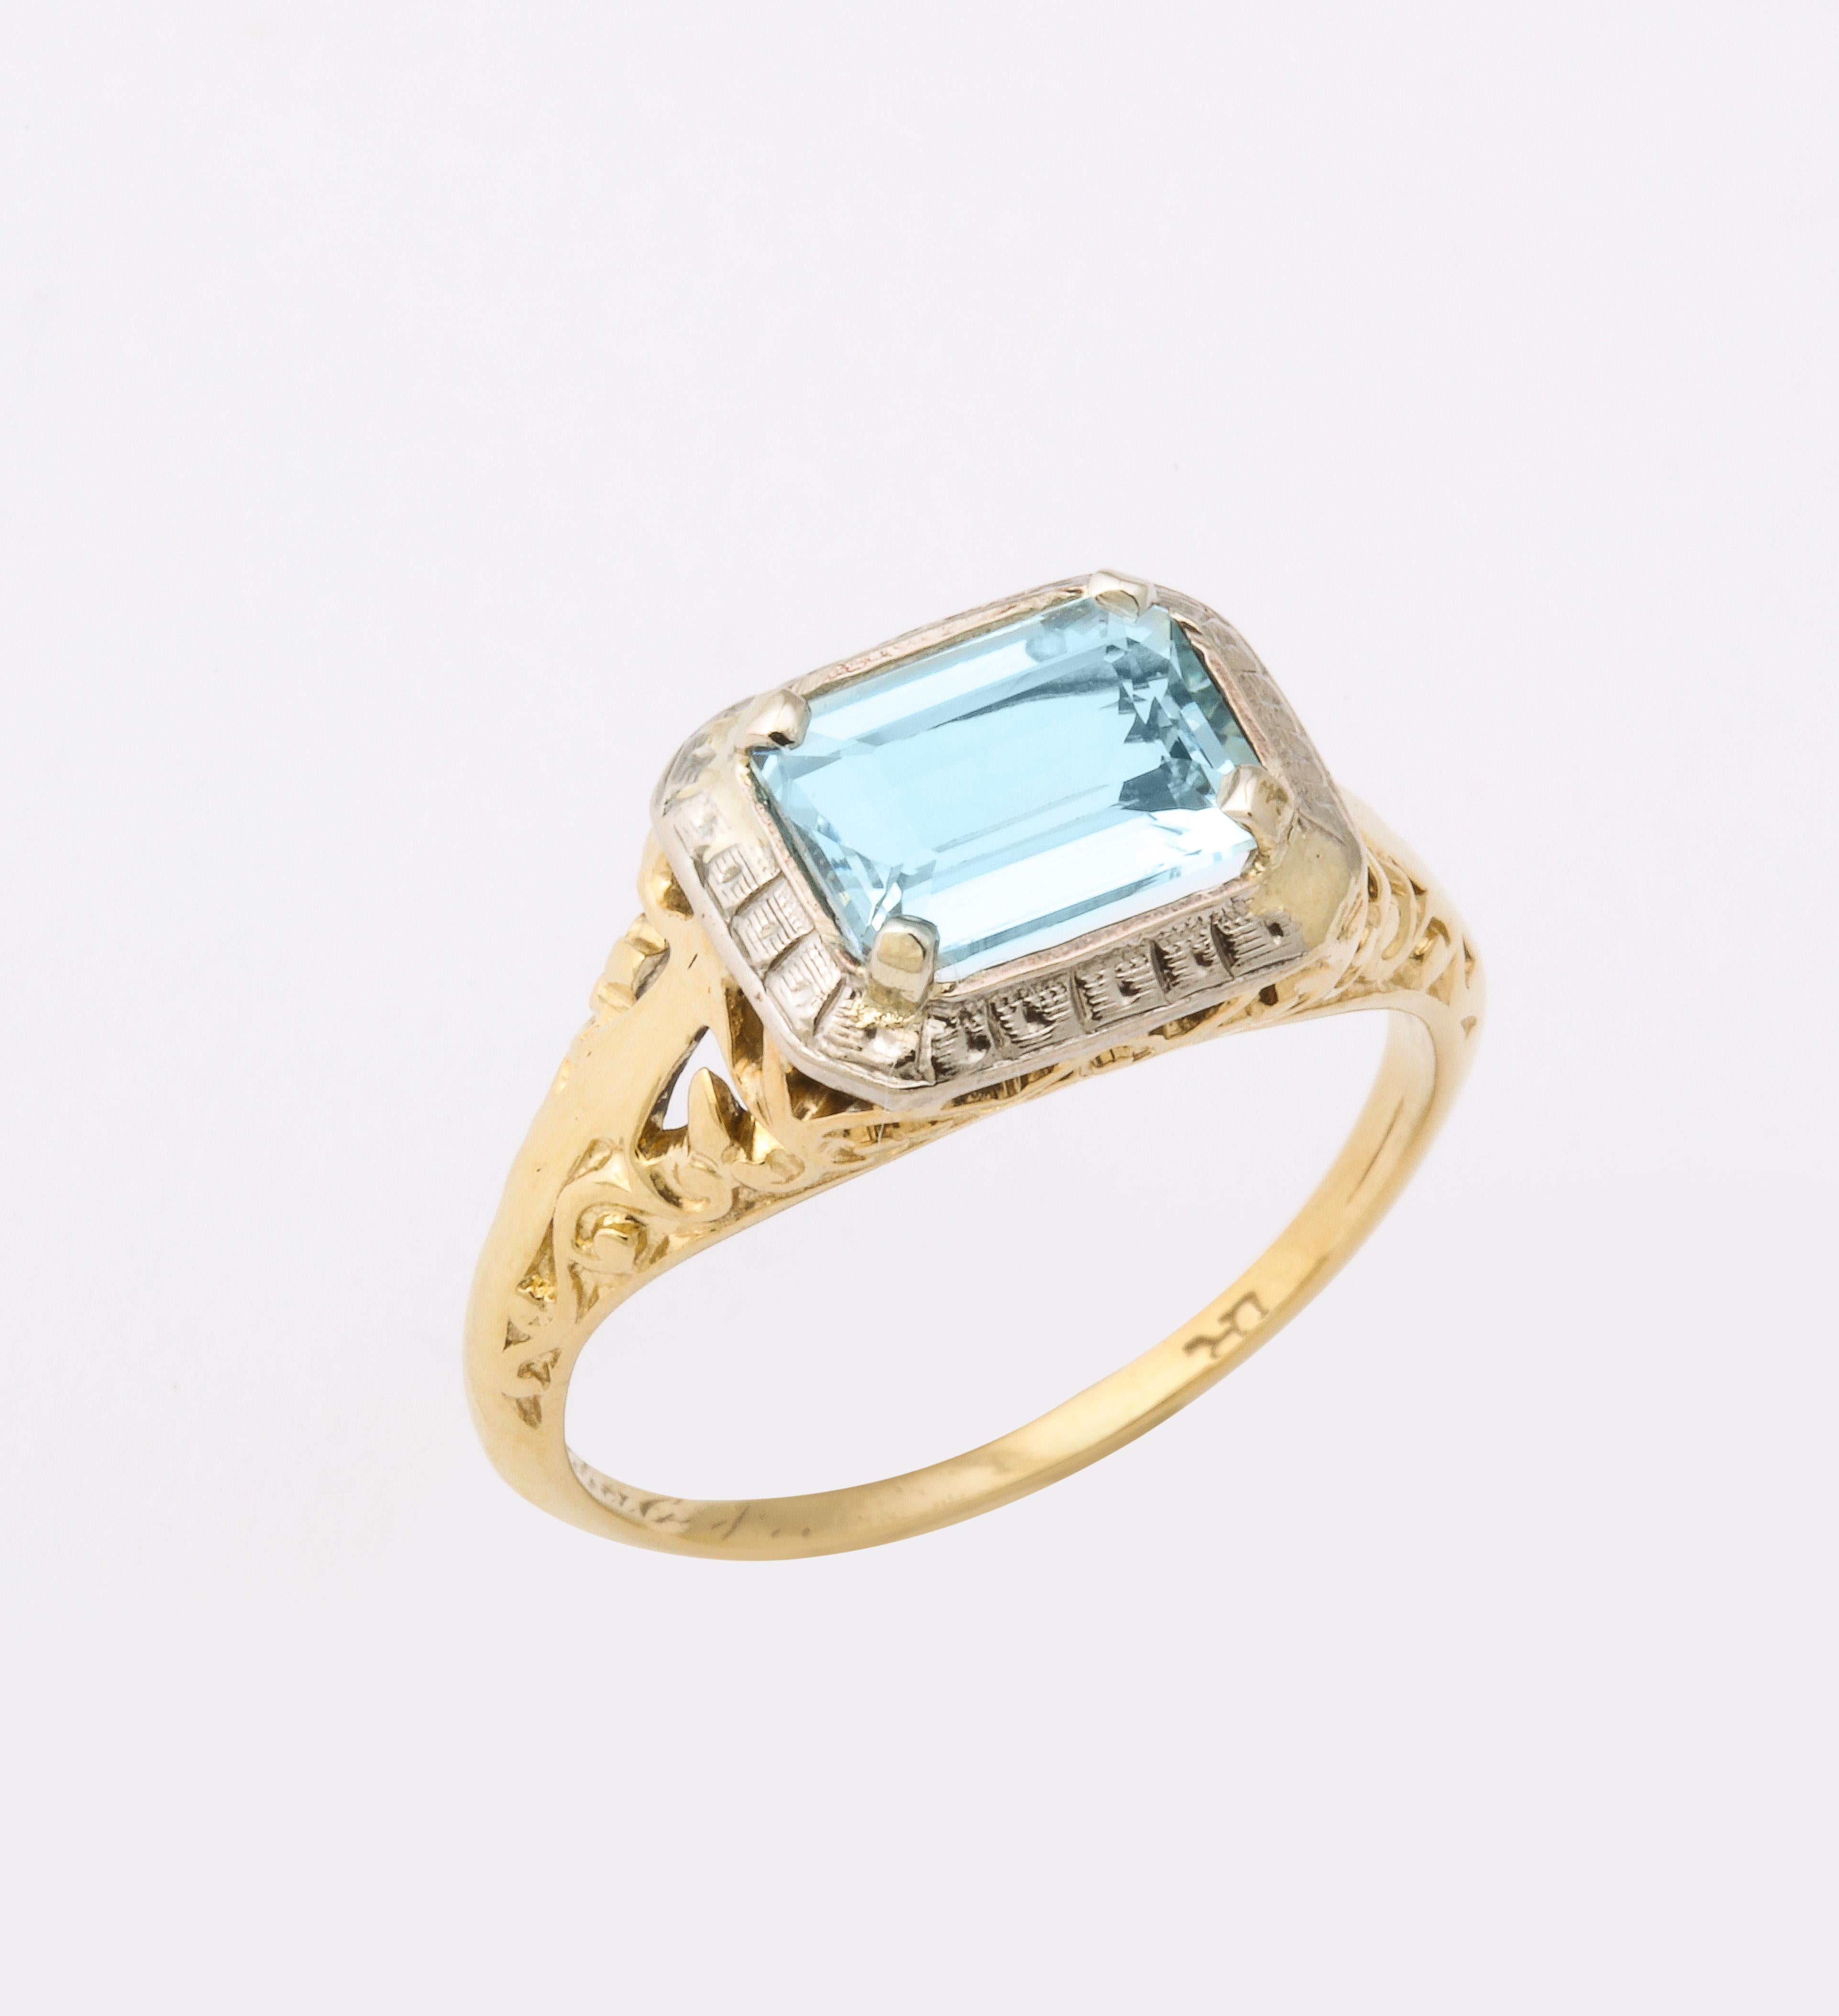 An alluring aquamarine Art Deco Ring in an east west setting. Loved since ancient times, it is beloved and desirable today.  Color is affecting and this gem simply feels good on the body. The beautiful watery blue stone suits every skin tone. Large